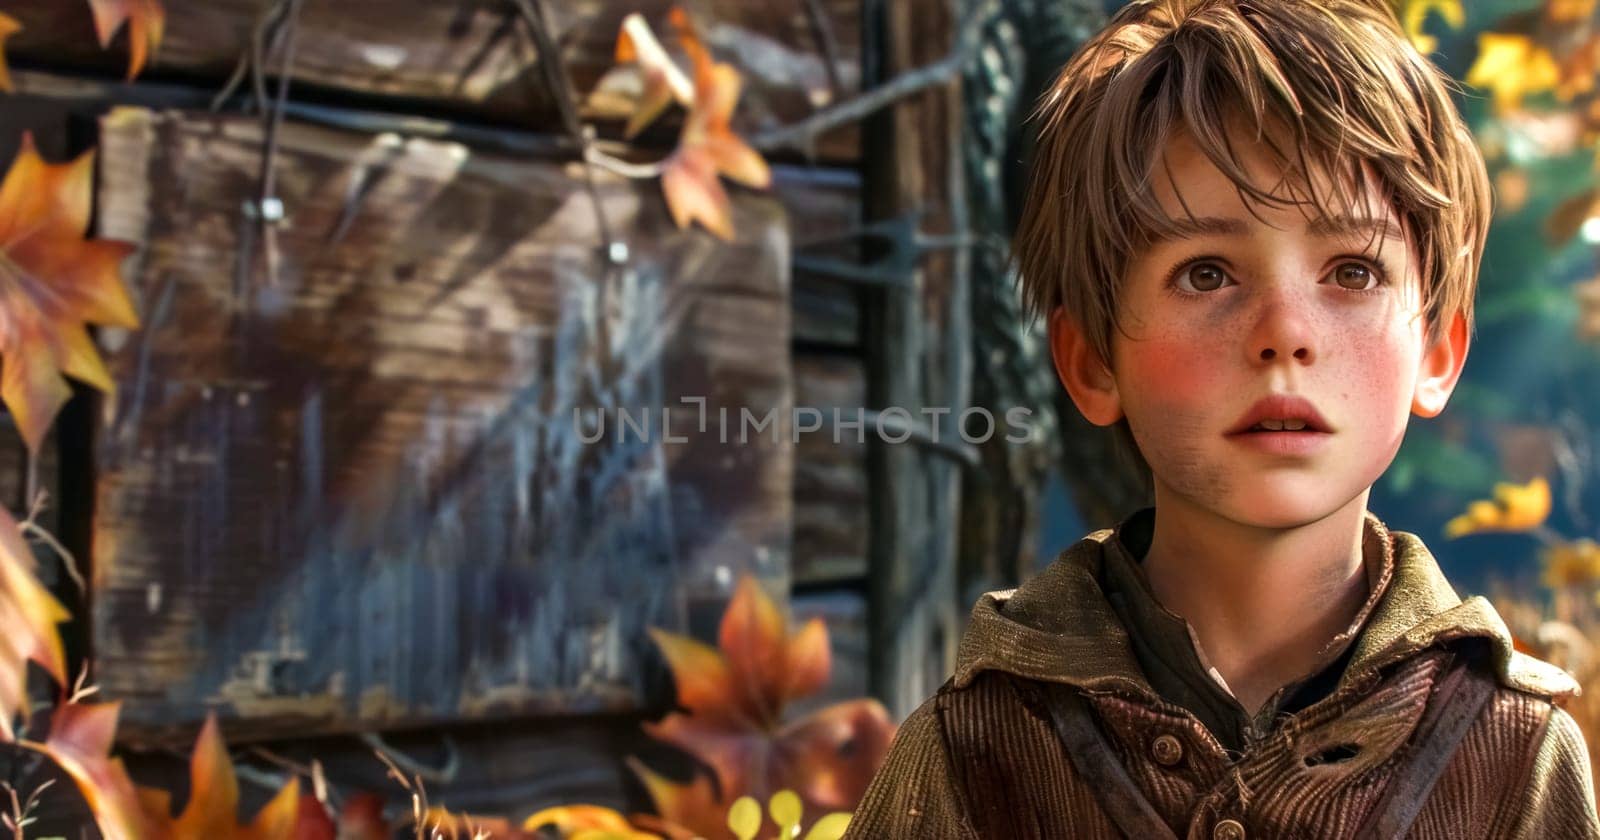 Boy with a look of wonder stands amidst falling autumn leaves